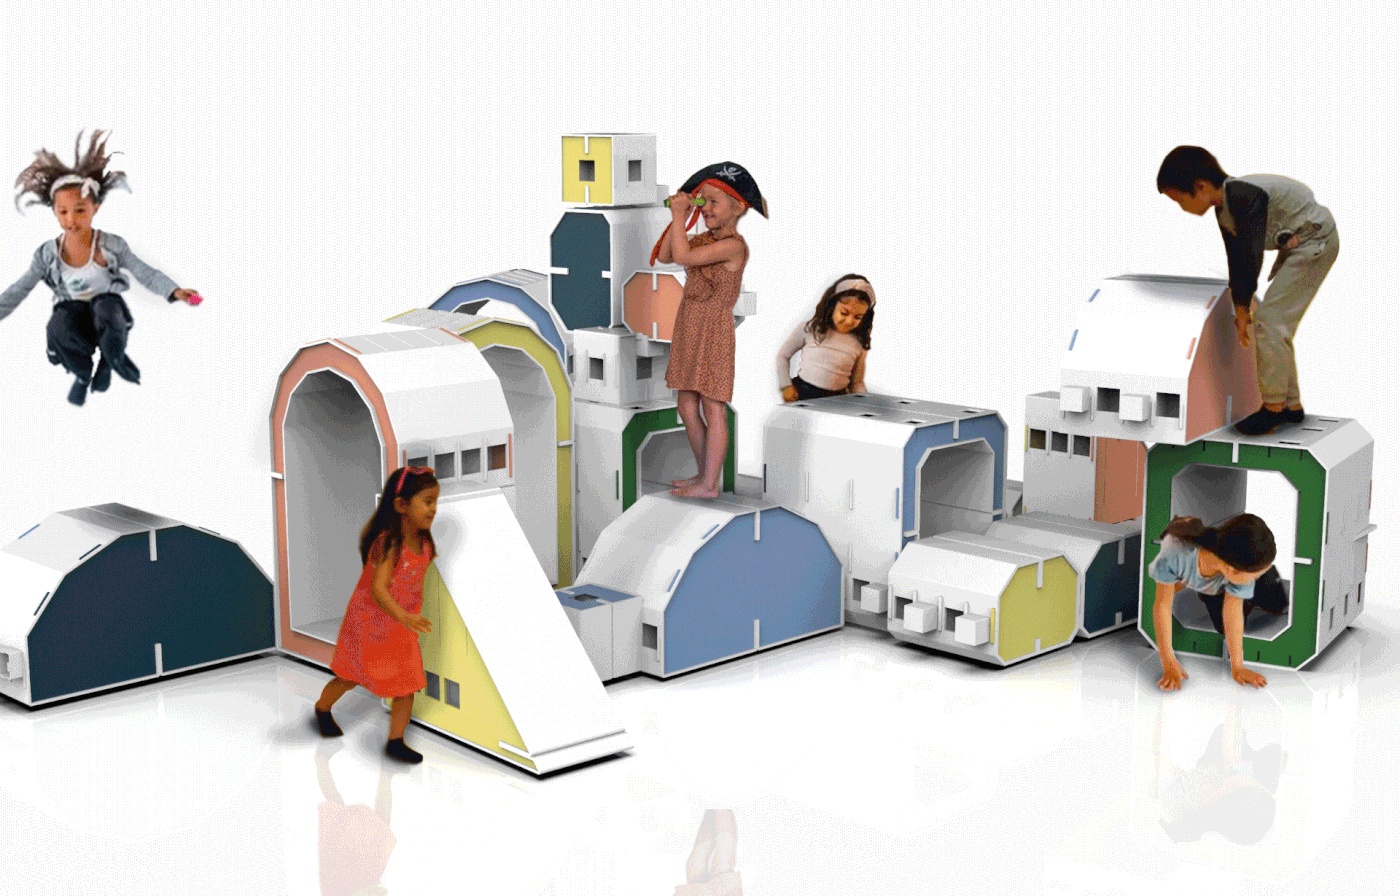 adventure play design for play kids modern modular play Risky play Sustainable toy design  toys